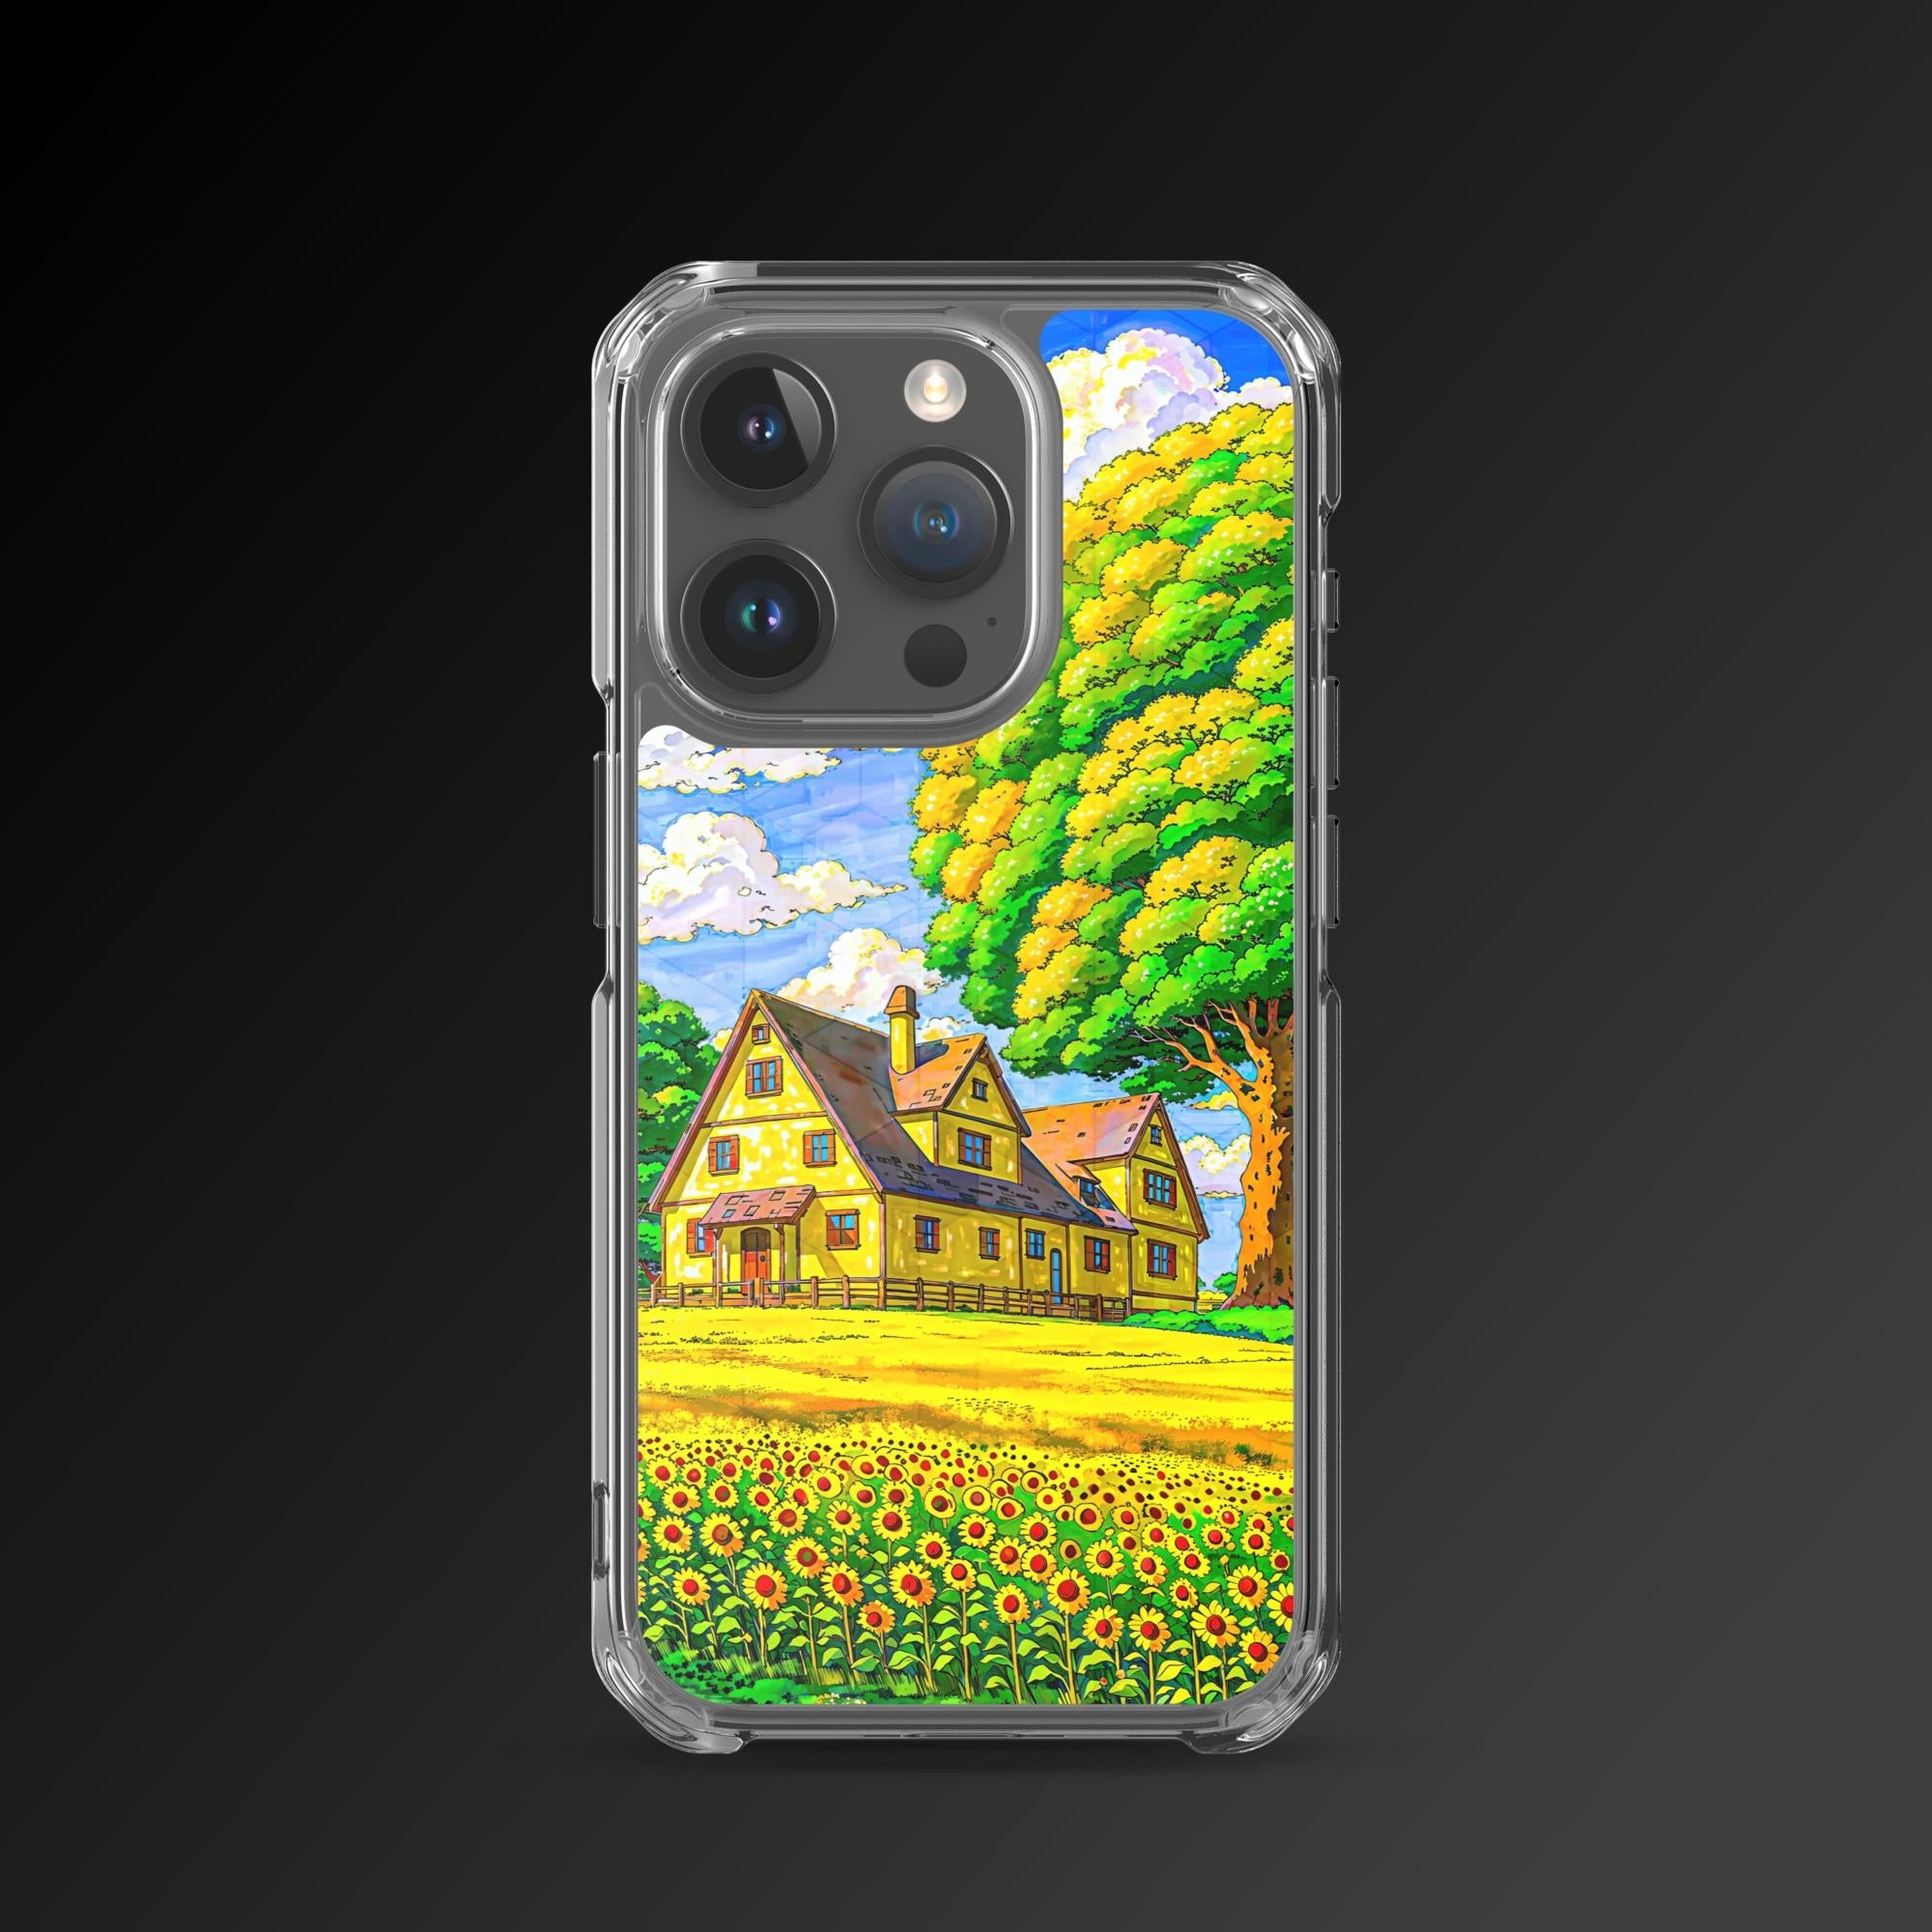 "Summertime reality" clear iphone case - Clear iphone case - Ever colorful